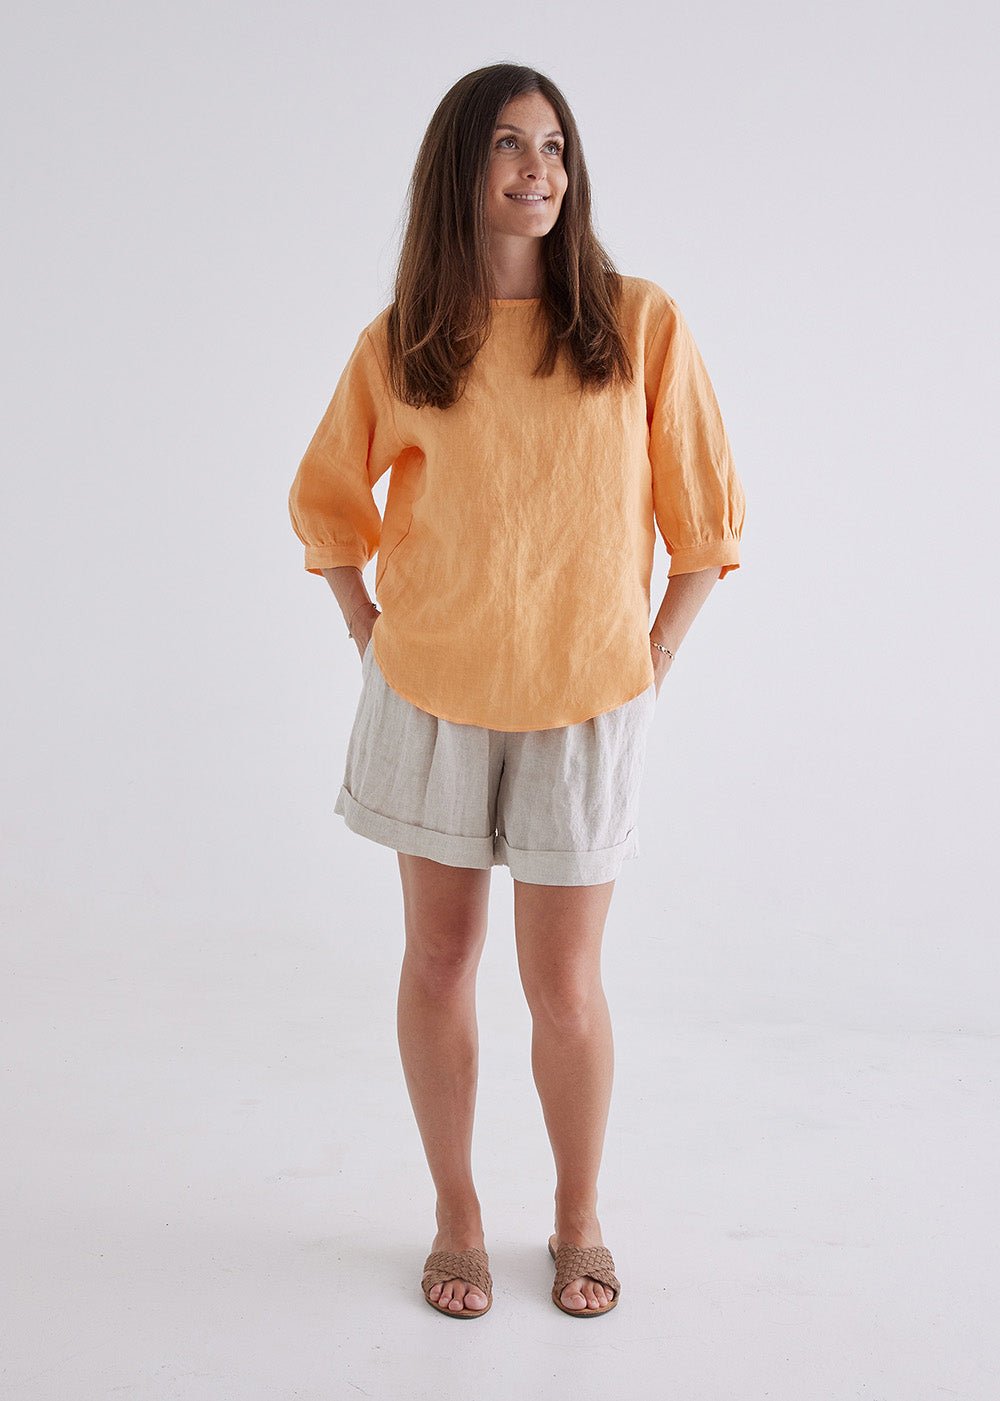 Laura Linen Top in Apricot-Devina Louise-stride